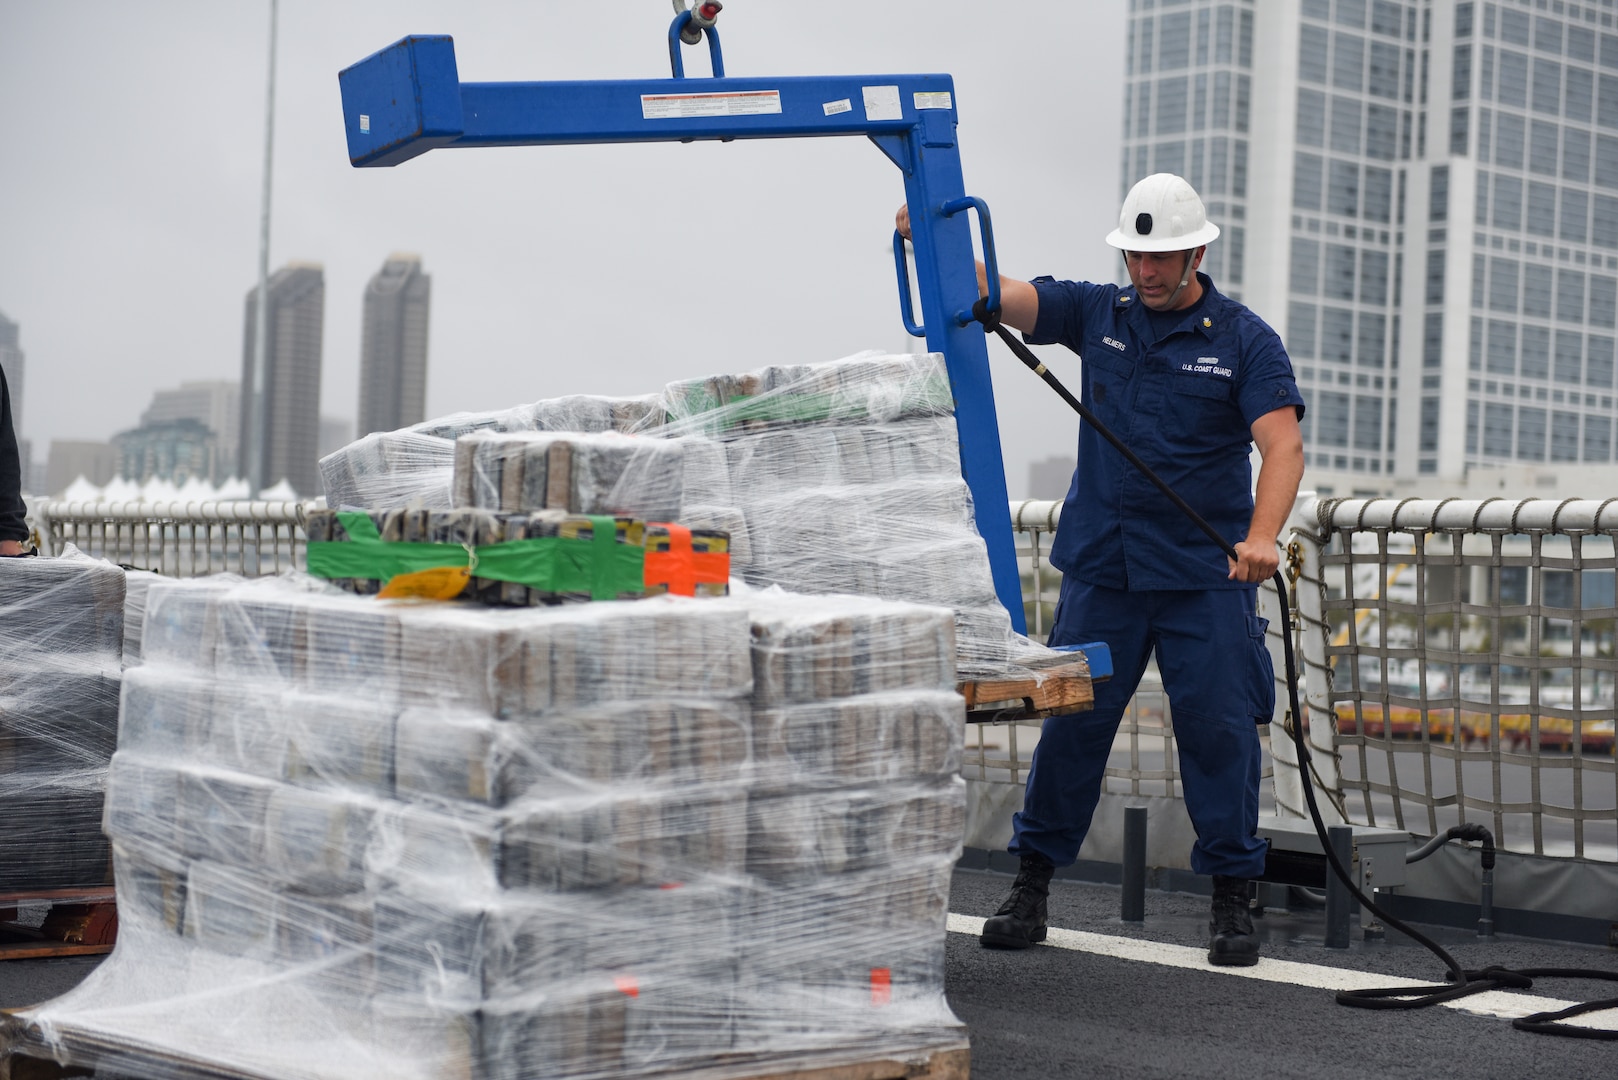 A Coastguardsman offloads contraband from the cutter at Tenth Avenue Marine Terminal in San Diego April 5, 2019.